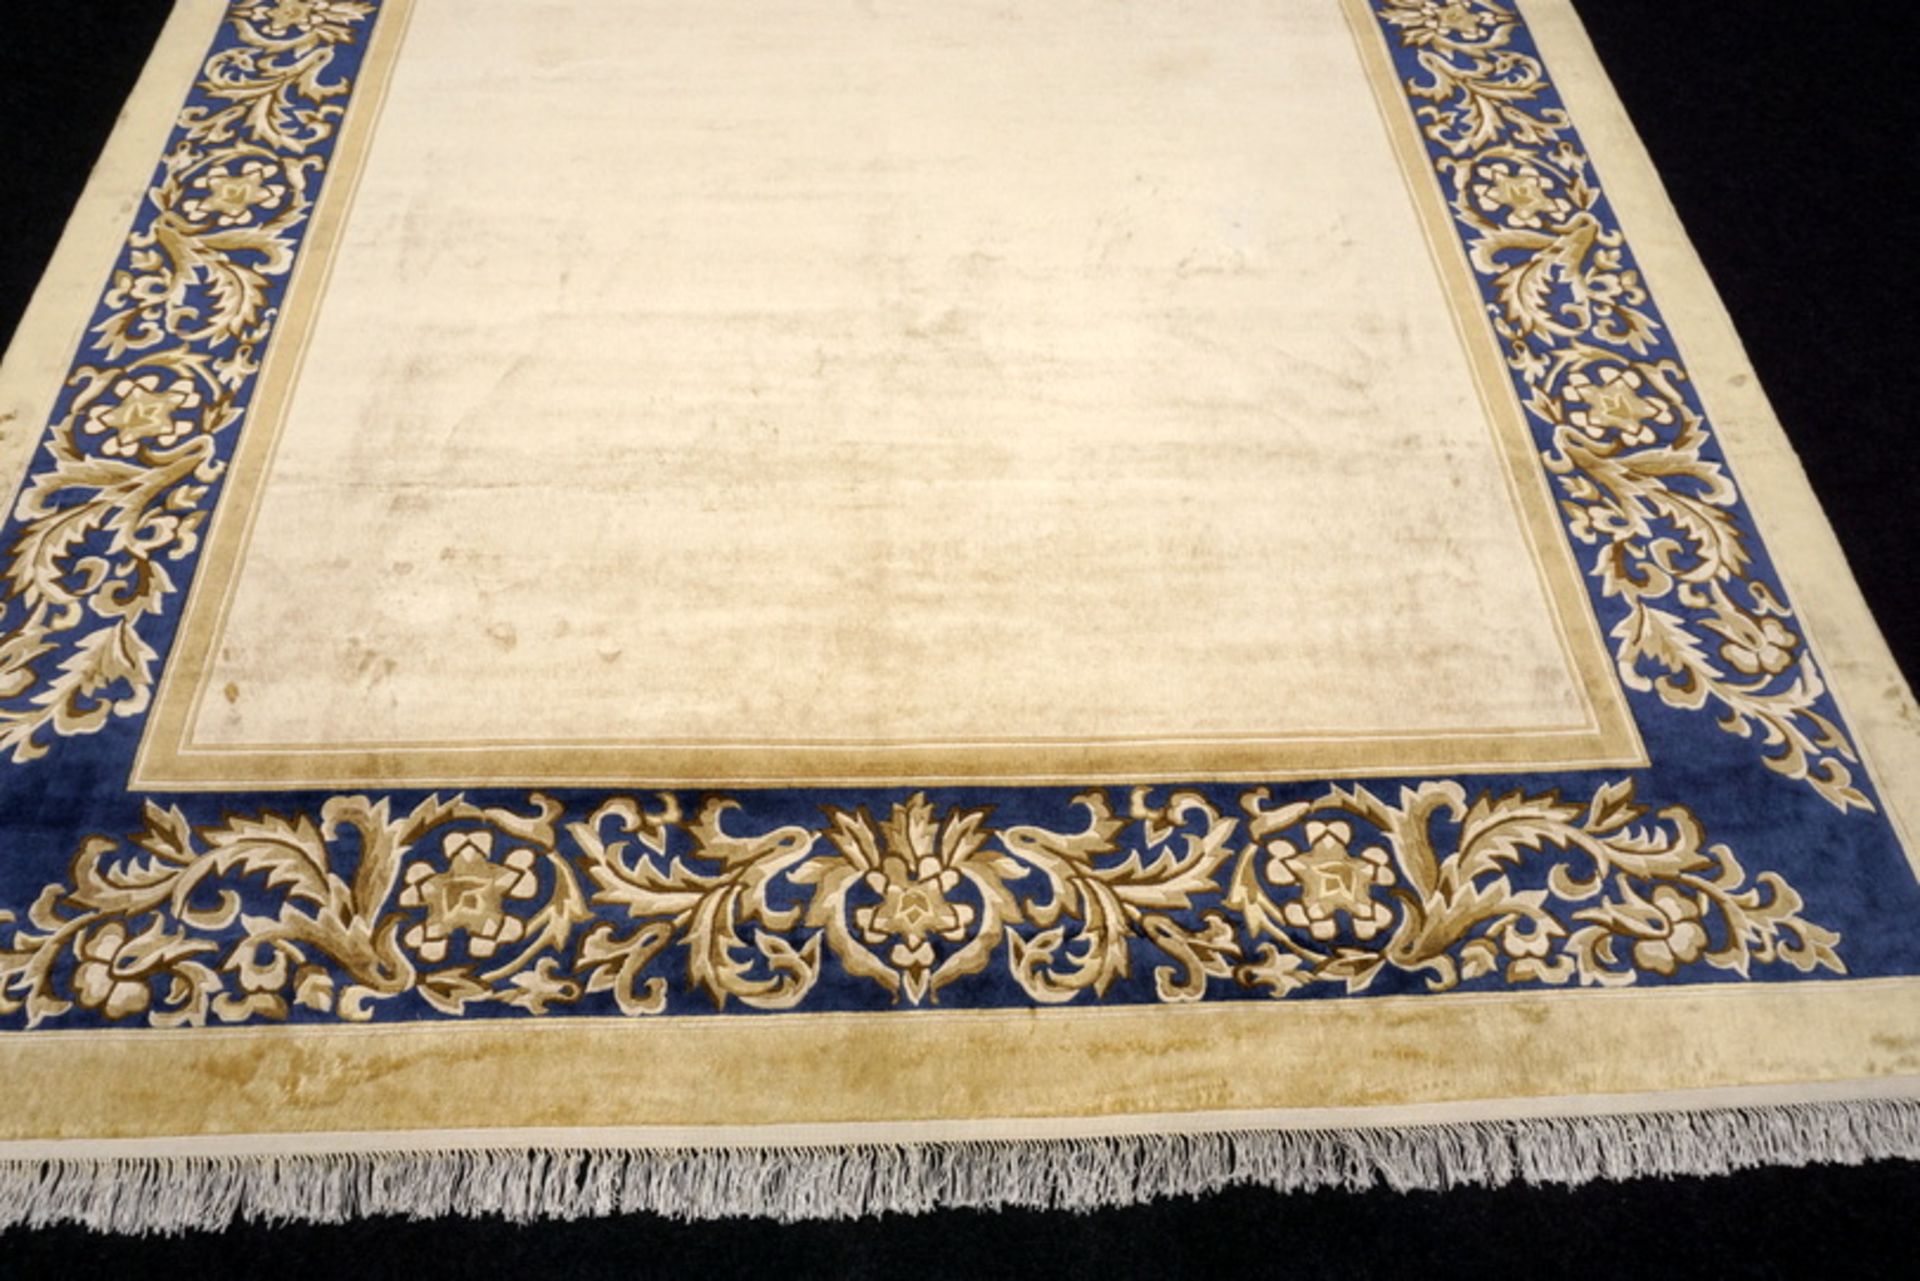 A Chinese Silk Carpet, Tientsin, Silk On Silk Foundation The Plain Ivory Field With A Blue Border - Image 7 of 20